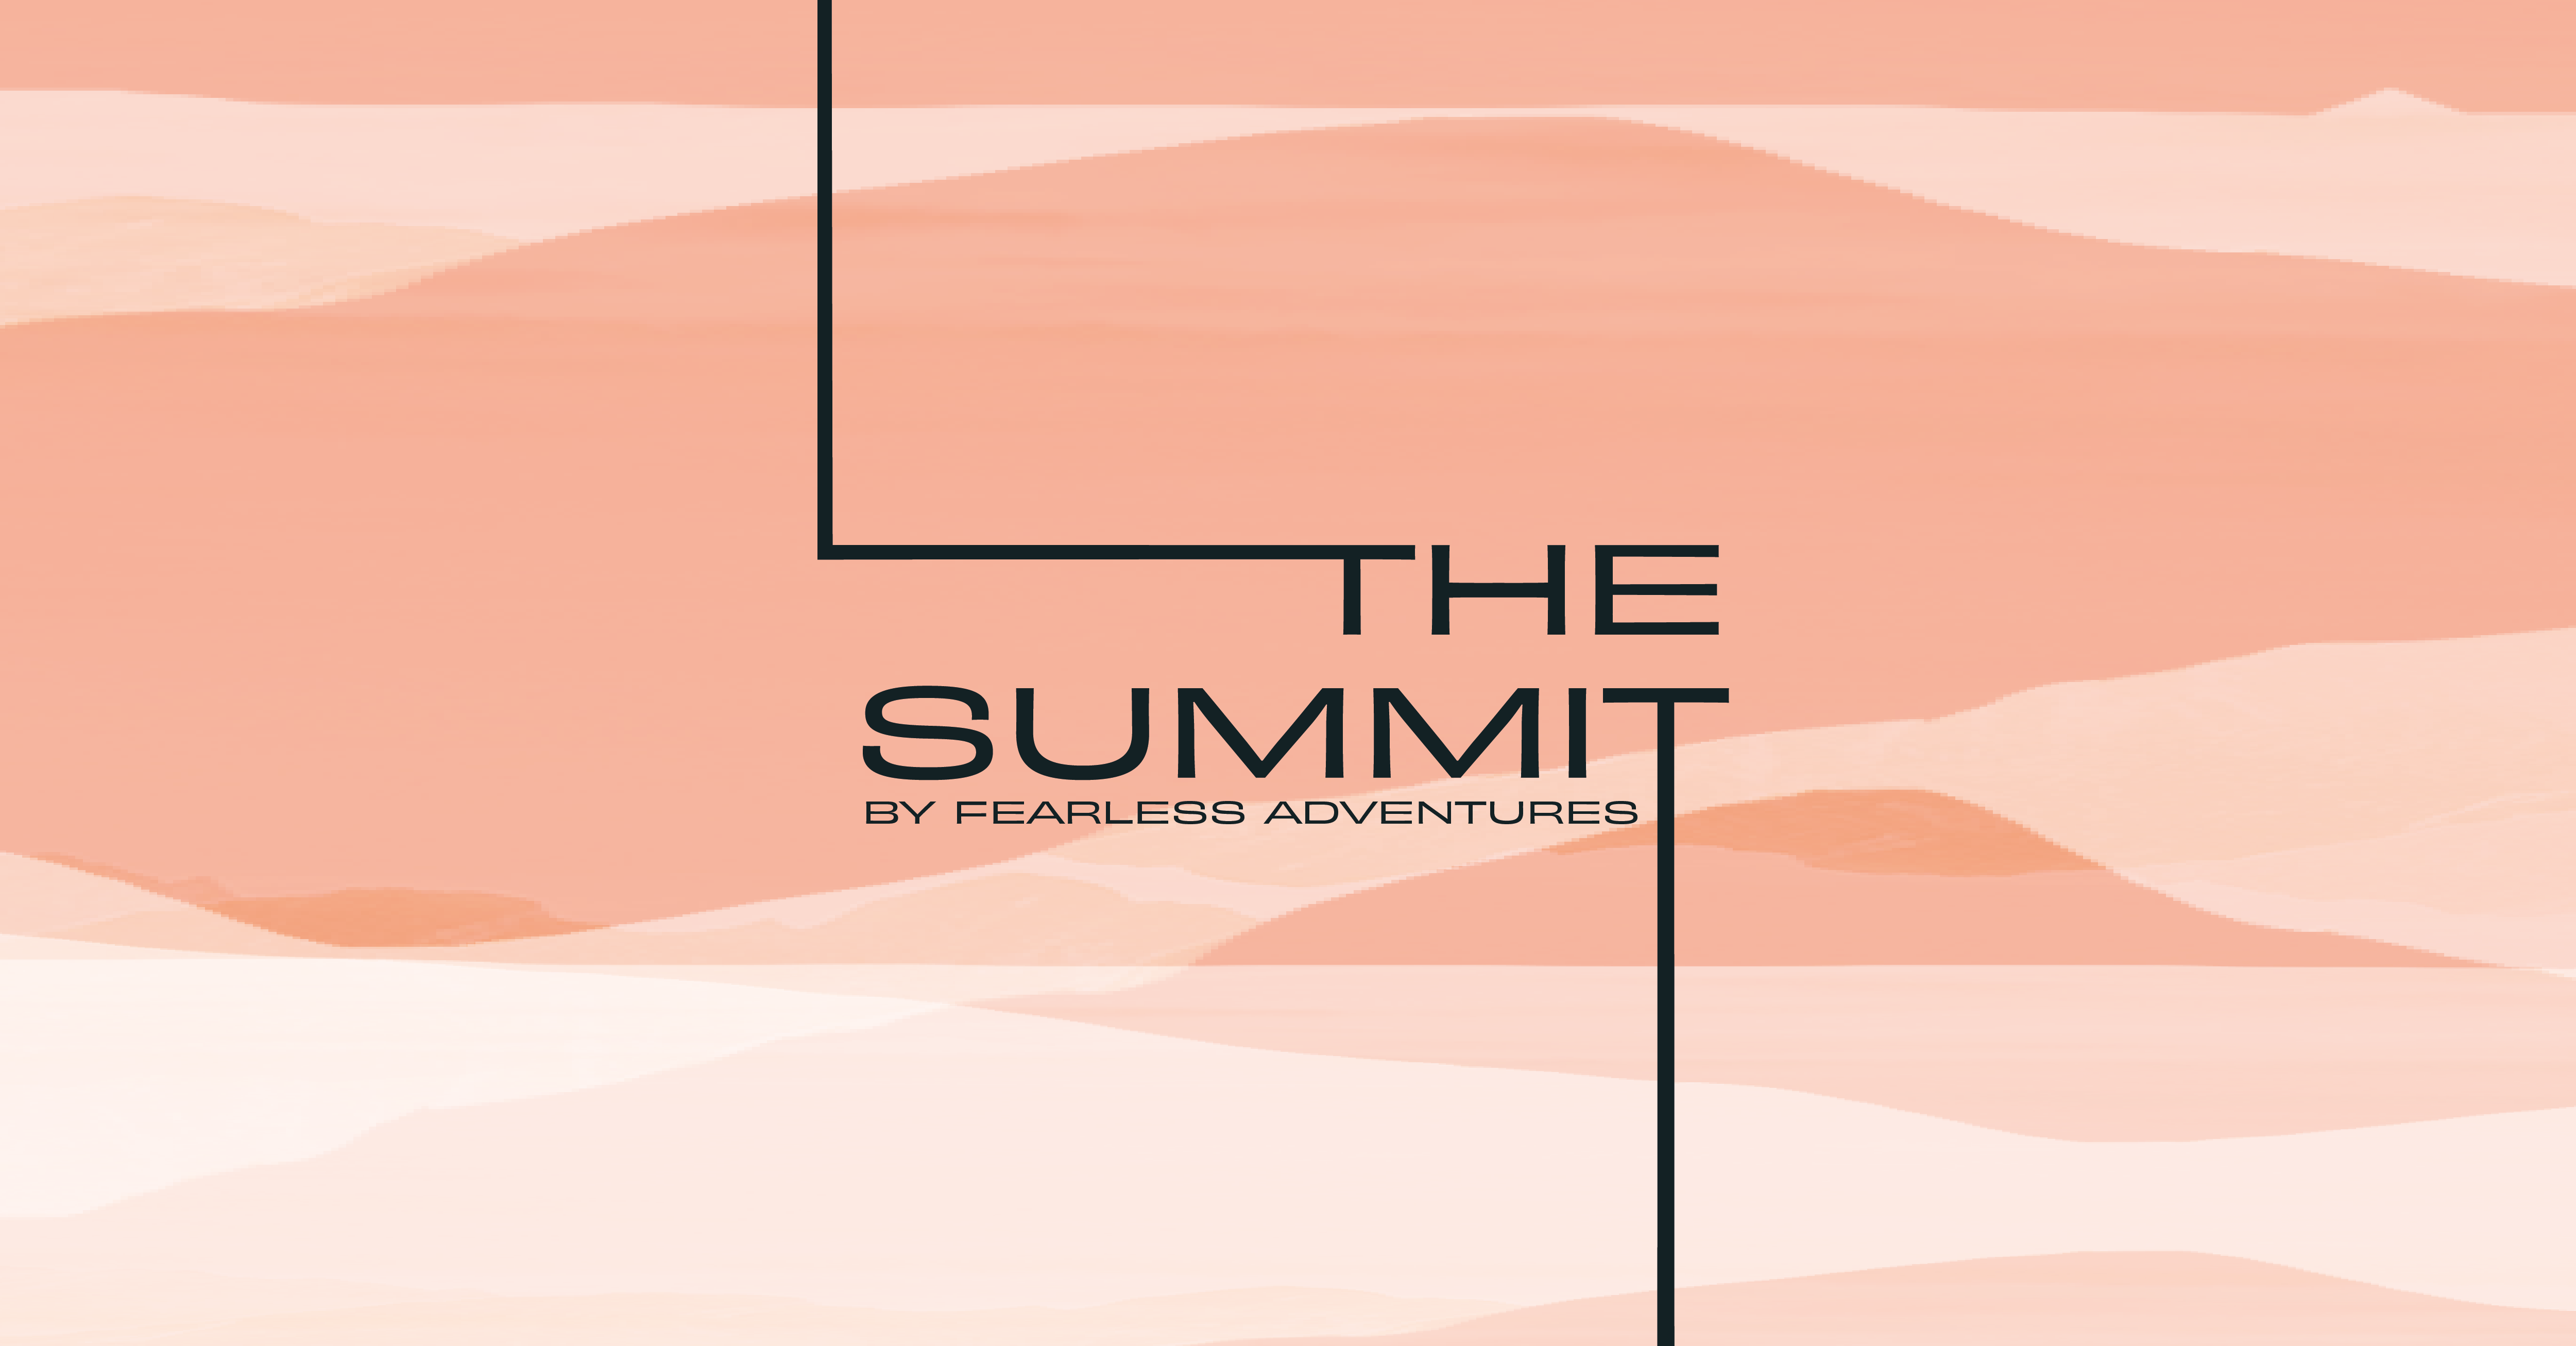 The Summit by Fearless Adventures